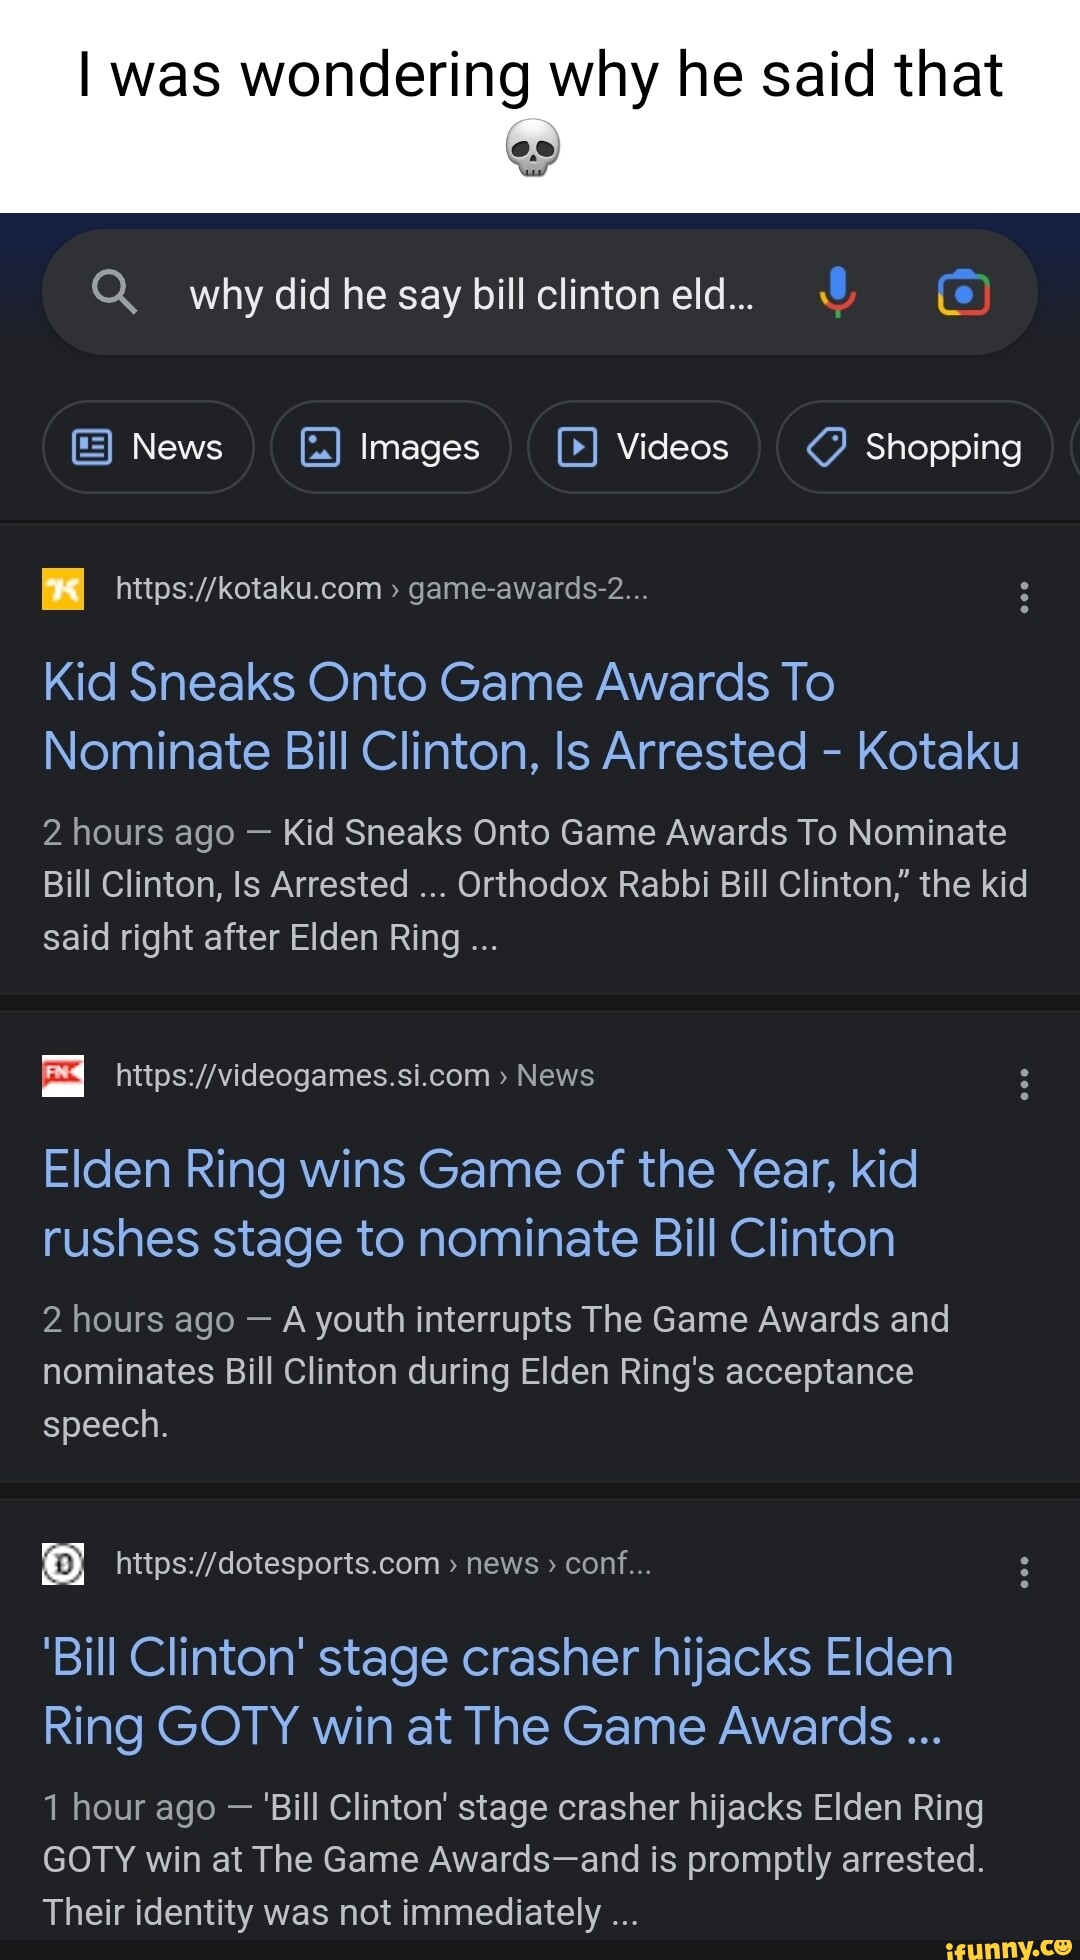 Elden Ring wins Game of the Year, Bill Clinton gets nomination as